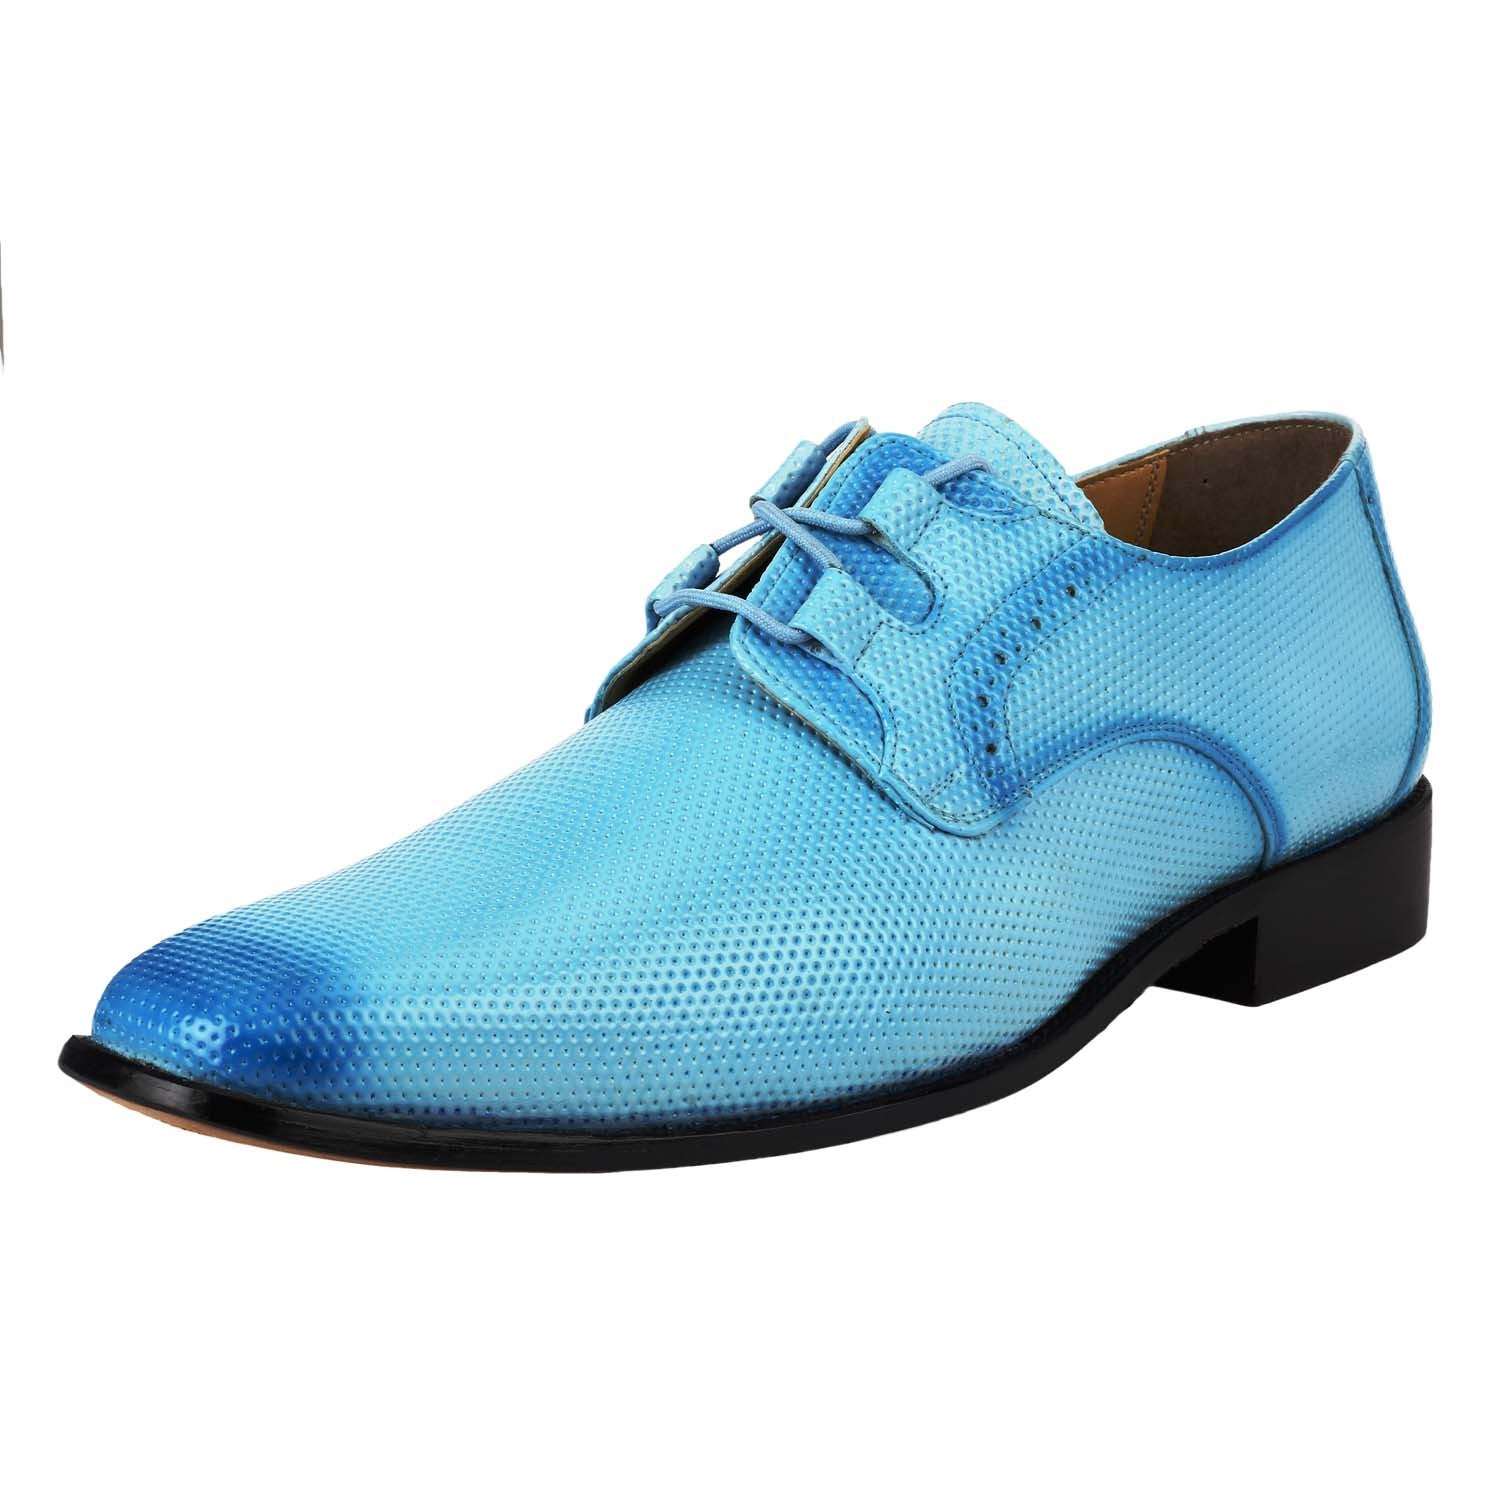 Introducing You to Mens Dress Shoes